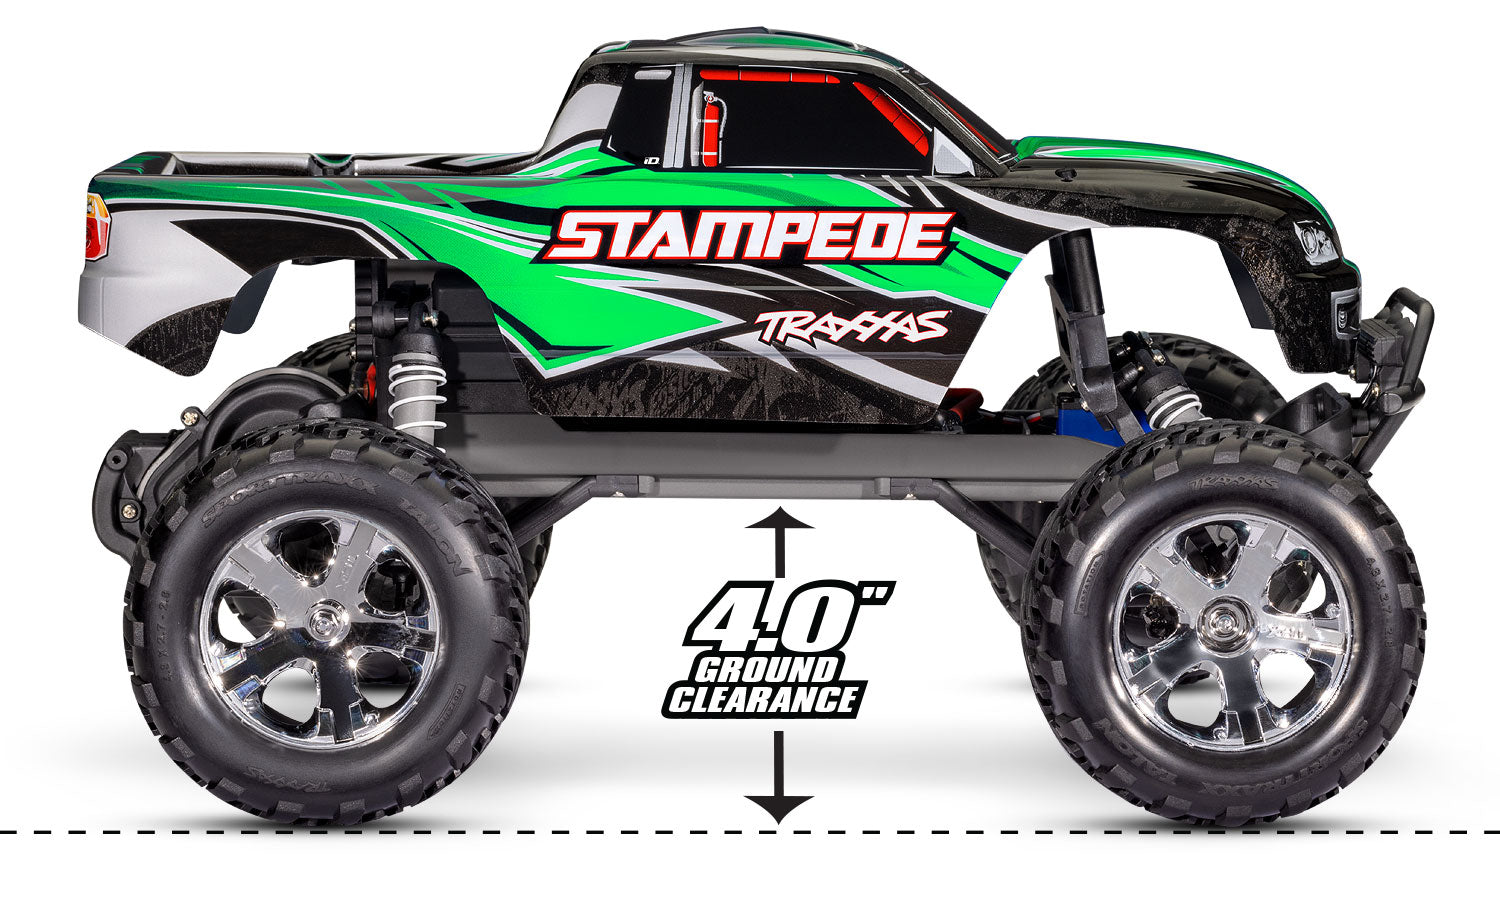 Traxxas Stampede 2wd 1/10  Monster Truck w/LED Light Set *DISCONTINUED *ARCHIVED